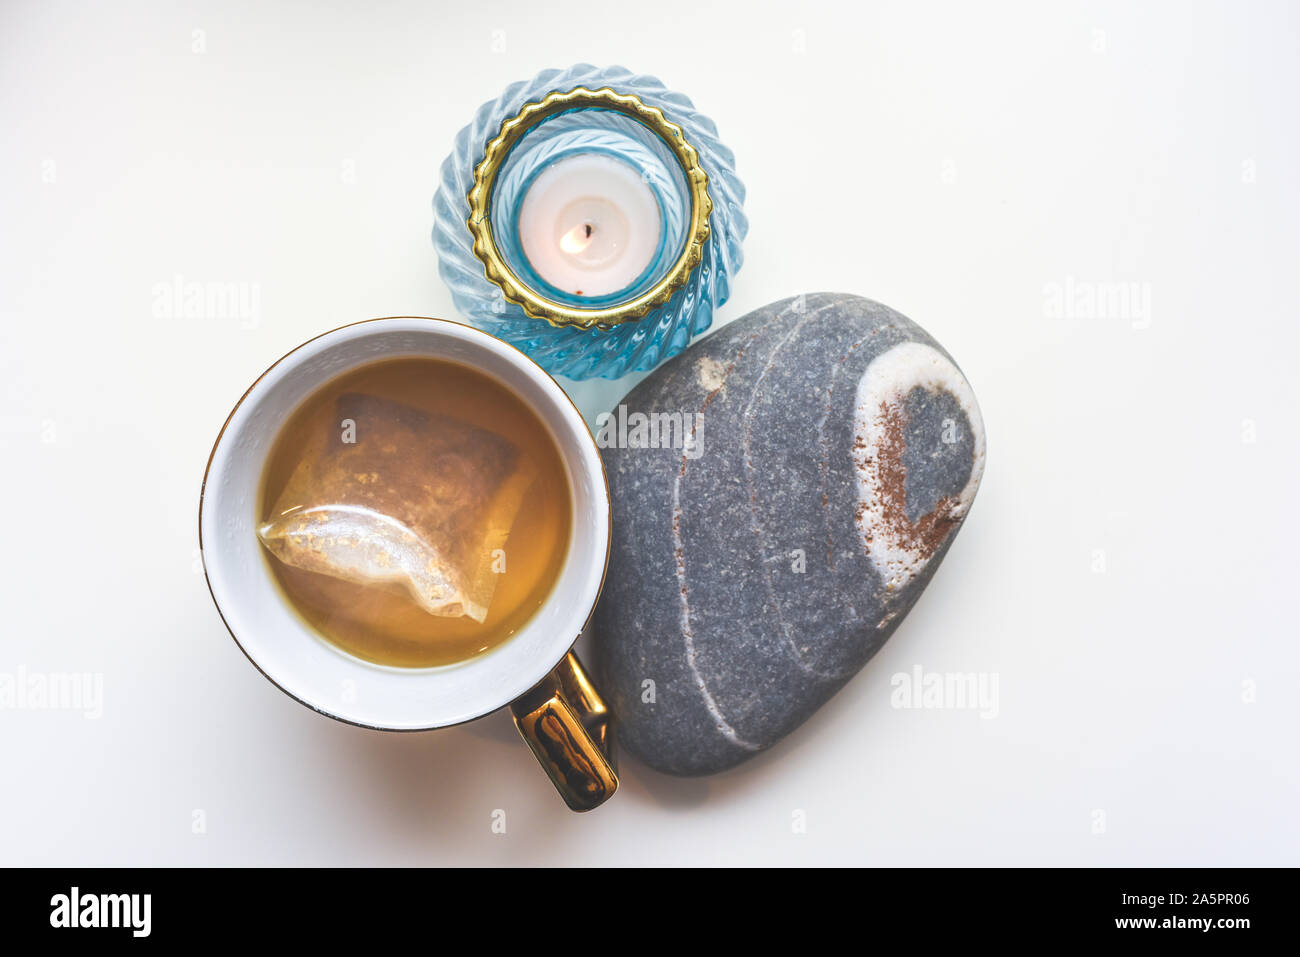 Calming camomile tea in a mug with arrangement of modern objects view from above Stock Photo